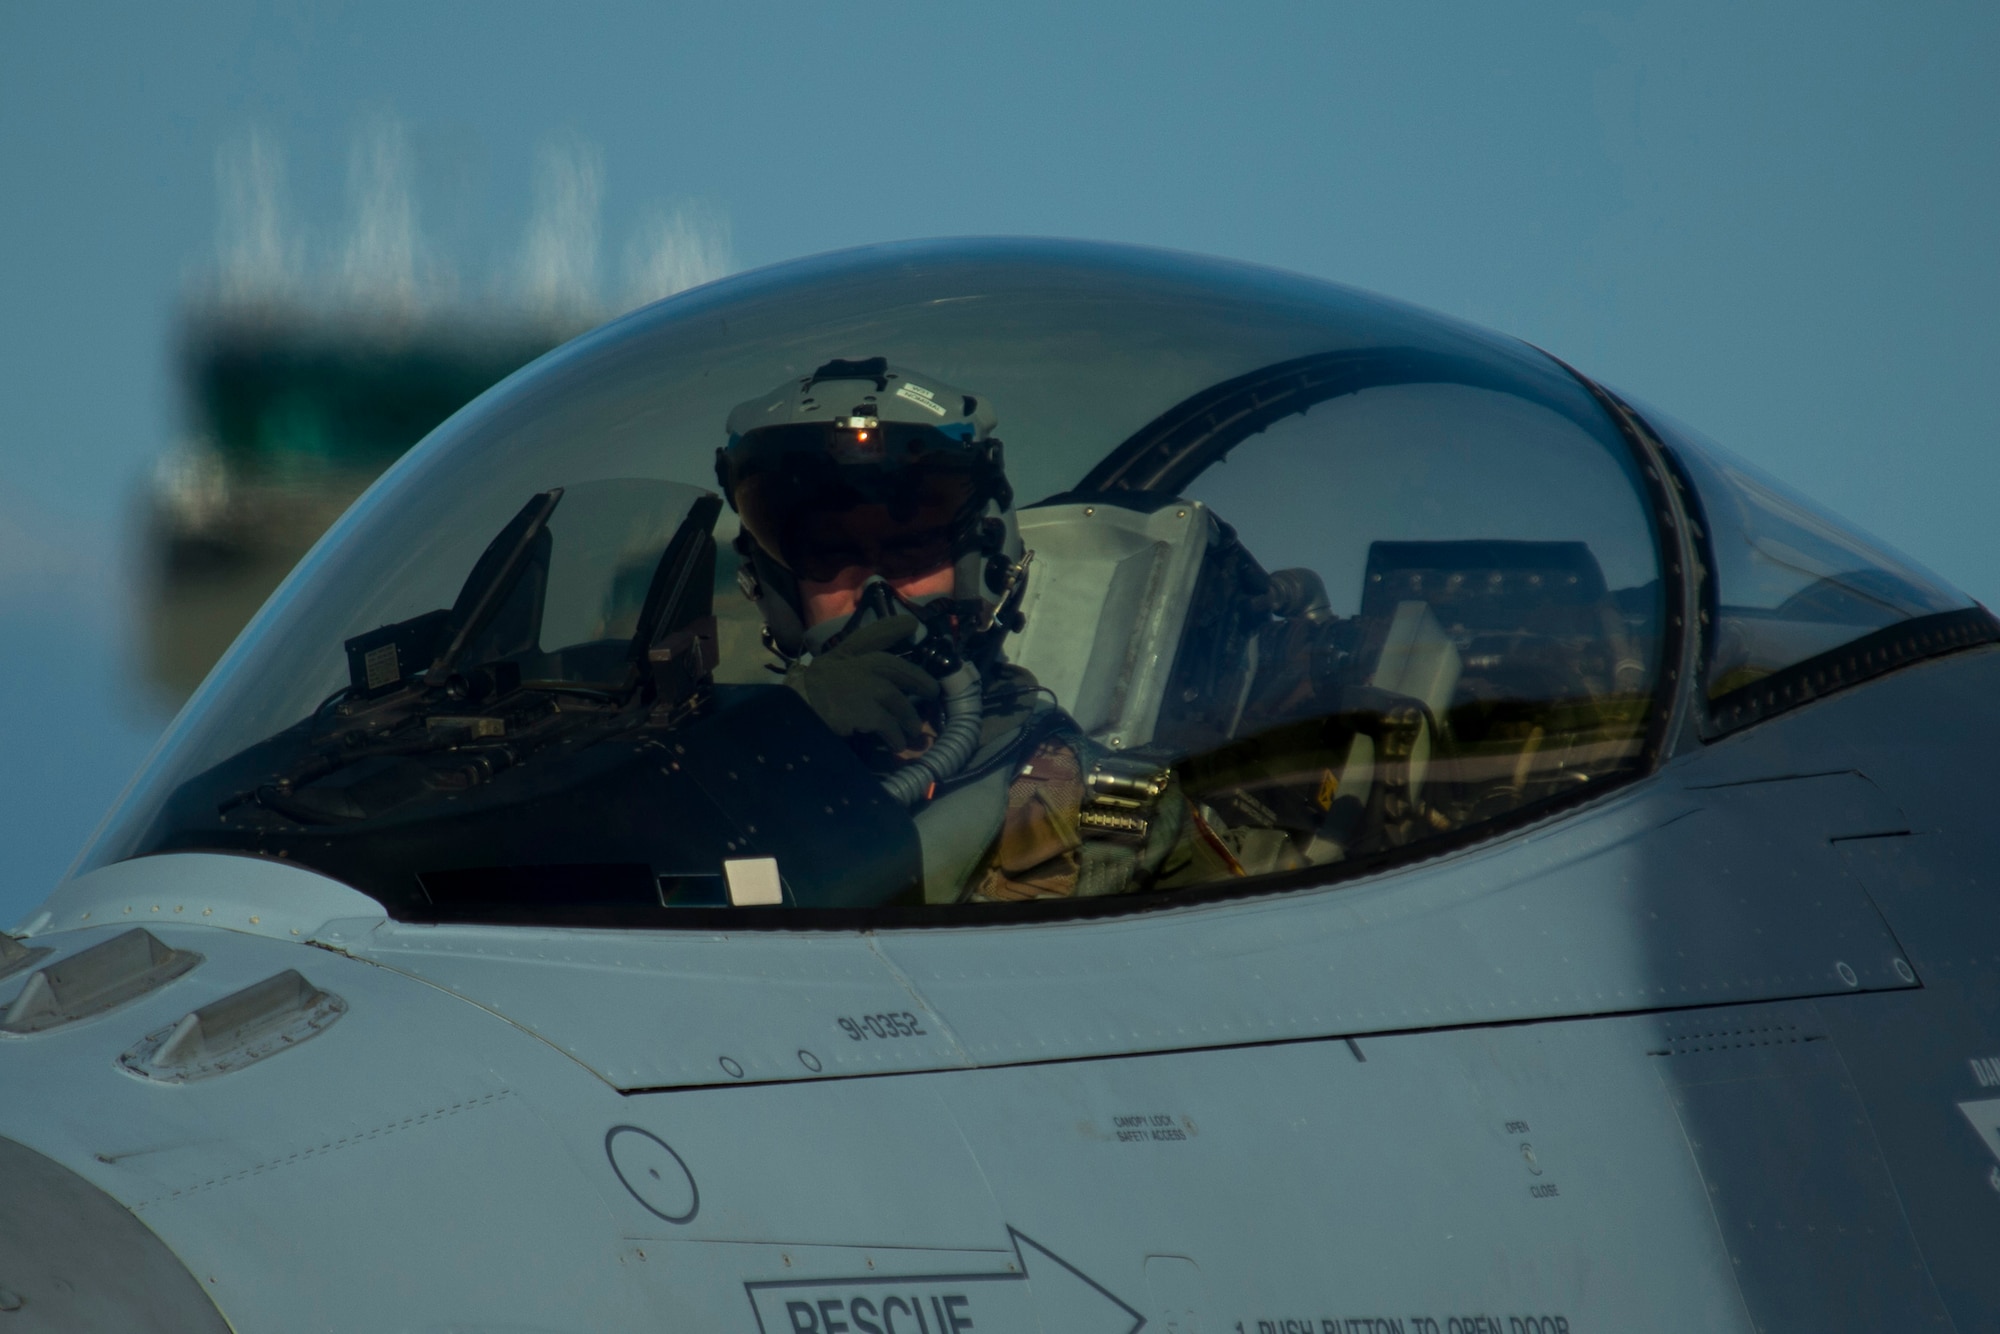 An F-16 Fighting Falcon fighter aircraft pilot, assigned to 480th Fighter Squadron at Spangdahlem Air Base, Germany, taxis an F-16 during the Trapani Air Show at Trapani Air Base, Italy, Oct. 19, 2015. The Trapani Air Show kicked off Trident Juncture 2015, a training exercise involving more than 30 Allied and Partner Nations taking place throughout Italy, Portugal, Spain, the Atlantic Ocean, the Mediterranean Sea, Canada, Norway, Germany, Belgium and the Netherlands. (U.S. Air Force photo by Airman 1st Class Luke Kitterman/Released
